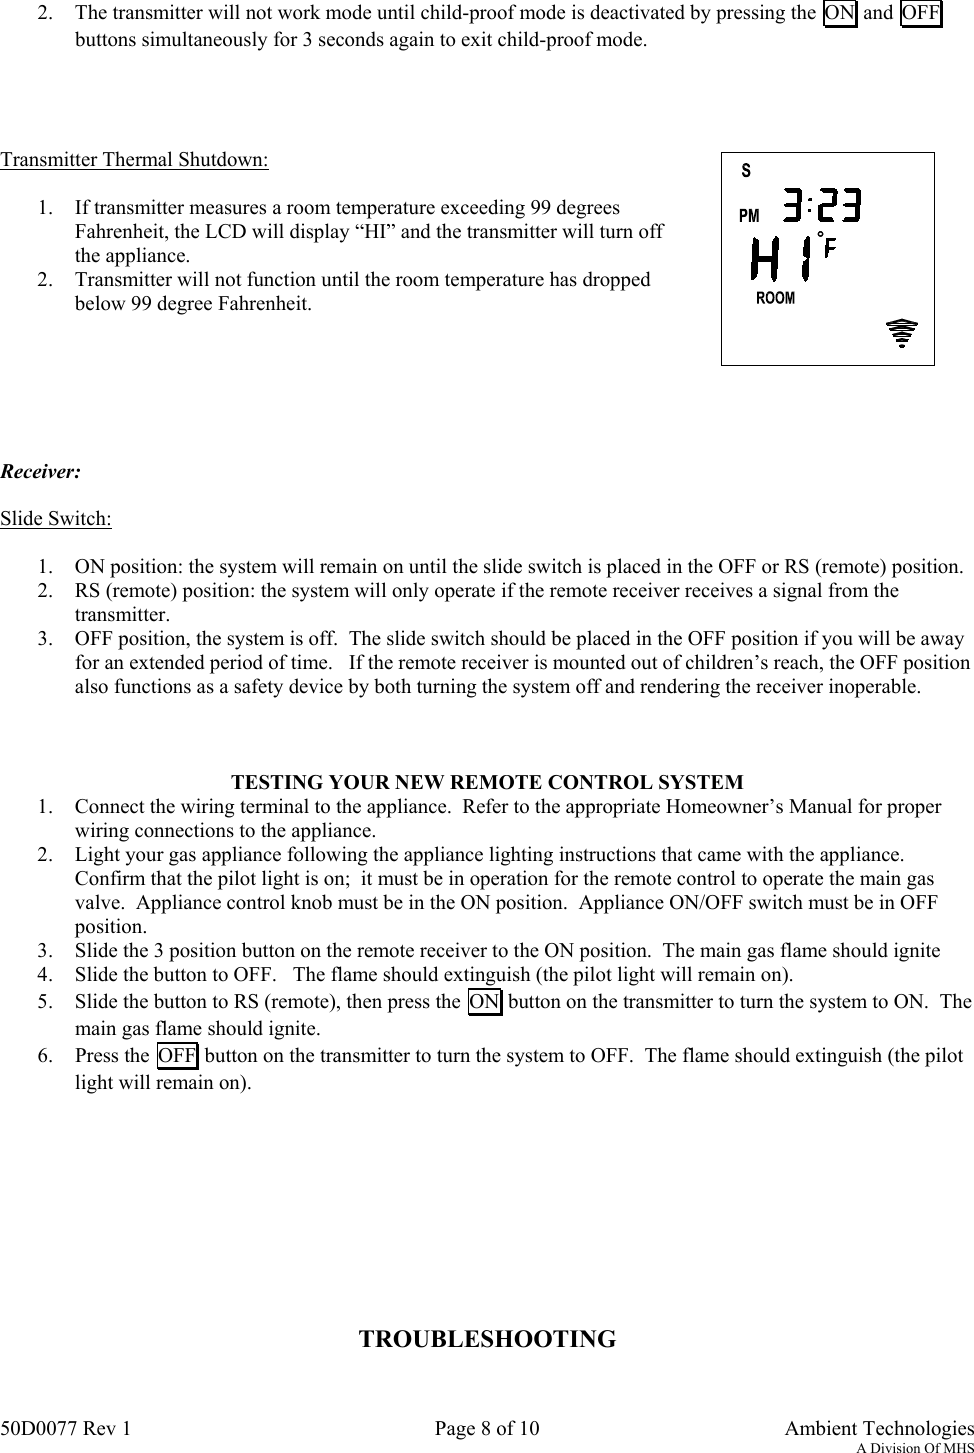 50D0077 Rev 1 Page 8 of 10  Ambient TechnologiesA Division Of MHS2. The transmitter will not work mode until child-proof mode is deactivated by pressing the  ON  and  OFFbuttons simultaneously for 3 seconds again to exit child-proof mode.Transmitter Thermal Shutdown:1. If transmitter measures a room temperature exceeding 99 degreesFahrenheit, the LCD will display “HI” and the transmitter will turn offthe appliance.2. Transmitter will not function until the room temperature has droppedbelow 99 degree Fahrenheit.Receiver:Slide Switch:1. ON position: the system will remain on until the slide switch is placed in the OFF or RS (remote) position.2. RS (remote) position: the system will only operate if the remote receiver receives a signal from thetransmitter.3. OFF position, the system is off.  The slide switch should be placed in the OFF position if you will be awayfor an extended period of time.   If the remote receiver is mounted out of children’s reach, the OFF positionalso functions as a safety device by both turning the system off and rendering the receiver inoperable.TESTING YOUR NEW REMOTE CONTROL SYSTEM1. Connect the wiring terminal to the appliance.  Refer to the appropriate Homeowner’s Manual for properwiring connections to the appliance.2. Light your gas appliance following the appliance lighting instructions that came with the appliance.Confirm that the pilot light is on;  it must be in operation for the remote control to operate the main gasvalve.  Appliance control knob must be in the ON position.  Appliance ON/OFF switch must be in OFFposition.3. Slide the 3 position button on the remote receiver to the ON position.  The main gas flame should ignite4. Slide the button to OFF.   The flame should extinguish (the pilot light will remain on).5. Slide the button to RS (remote), then press the  ON  button on the transmitter to turn the system to ON.  Themain gas flame should ignite.6. Press the  OFF  button on the transmitter to turn the system to OFF.  The flame should extinguish (the pilotlight will remain on).TROUBLESHOOTING